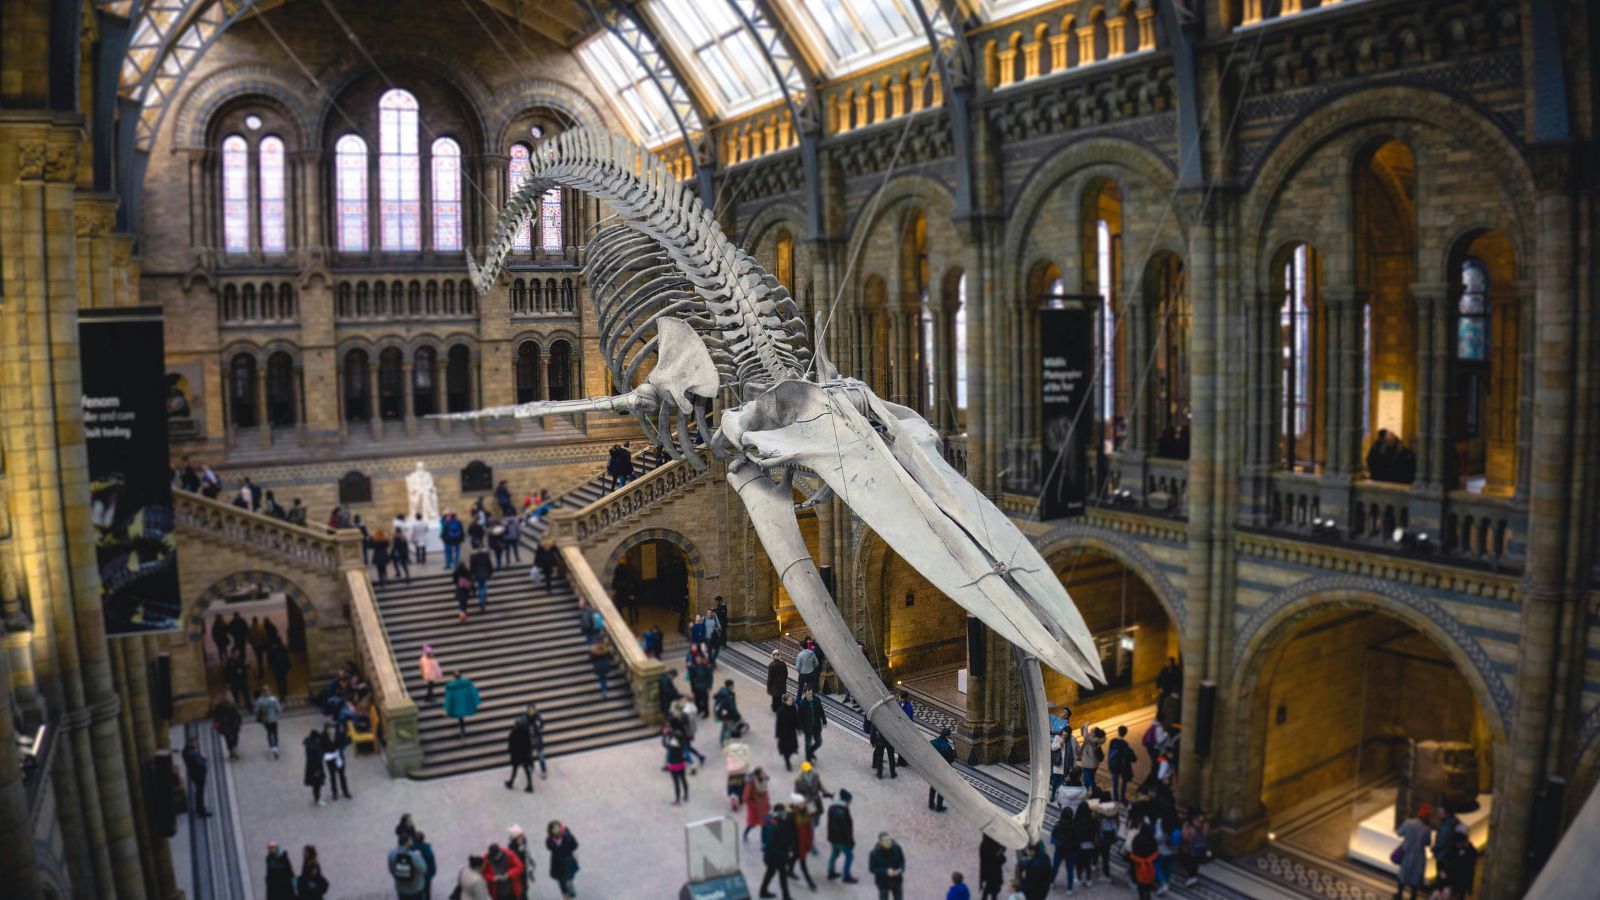 <p>Located in South Kensington, the <a href="https://www.visitlondon.com/things-to-do/place/427179-natural-history-museum#:~:text=Is%20the%20Natural%20History%20Museum,timed%20entry%20ticket%20is%20recommended.">National History Museum</a> has several million artifacts dedicated to life and earth sciences. It boasts specimens collected by Charles Darwin and has an extensive and ornate dinosaur structure, which is why thousands of tourists visit daily. Luckily, entrance is free, but temporary exhibitions may be paired with a small fee. This is why it is recommended that tourists pre-book a timed entry ticket.</p>